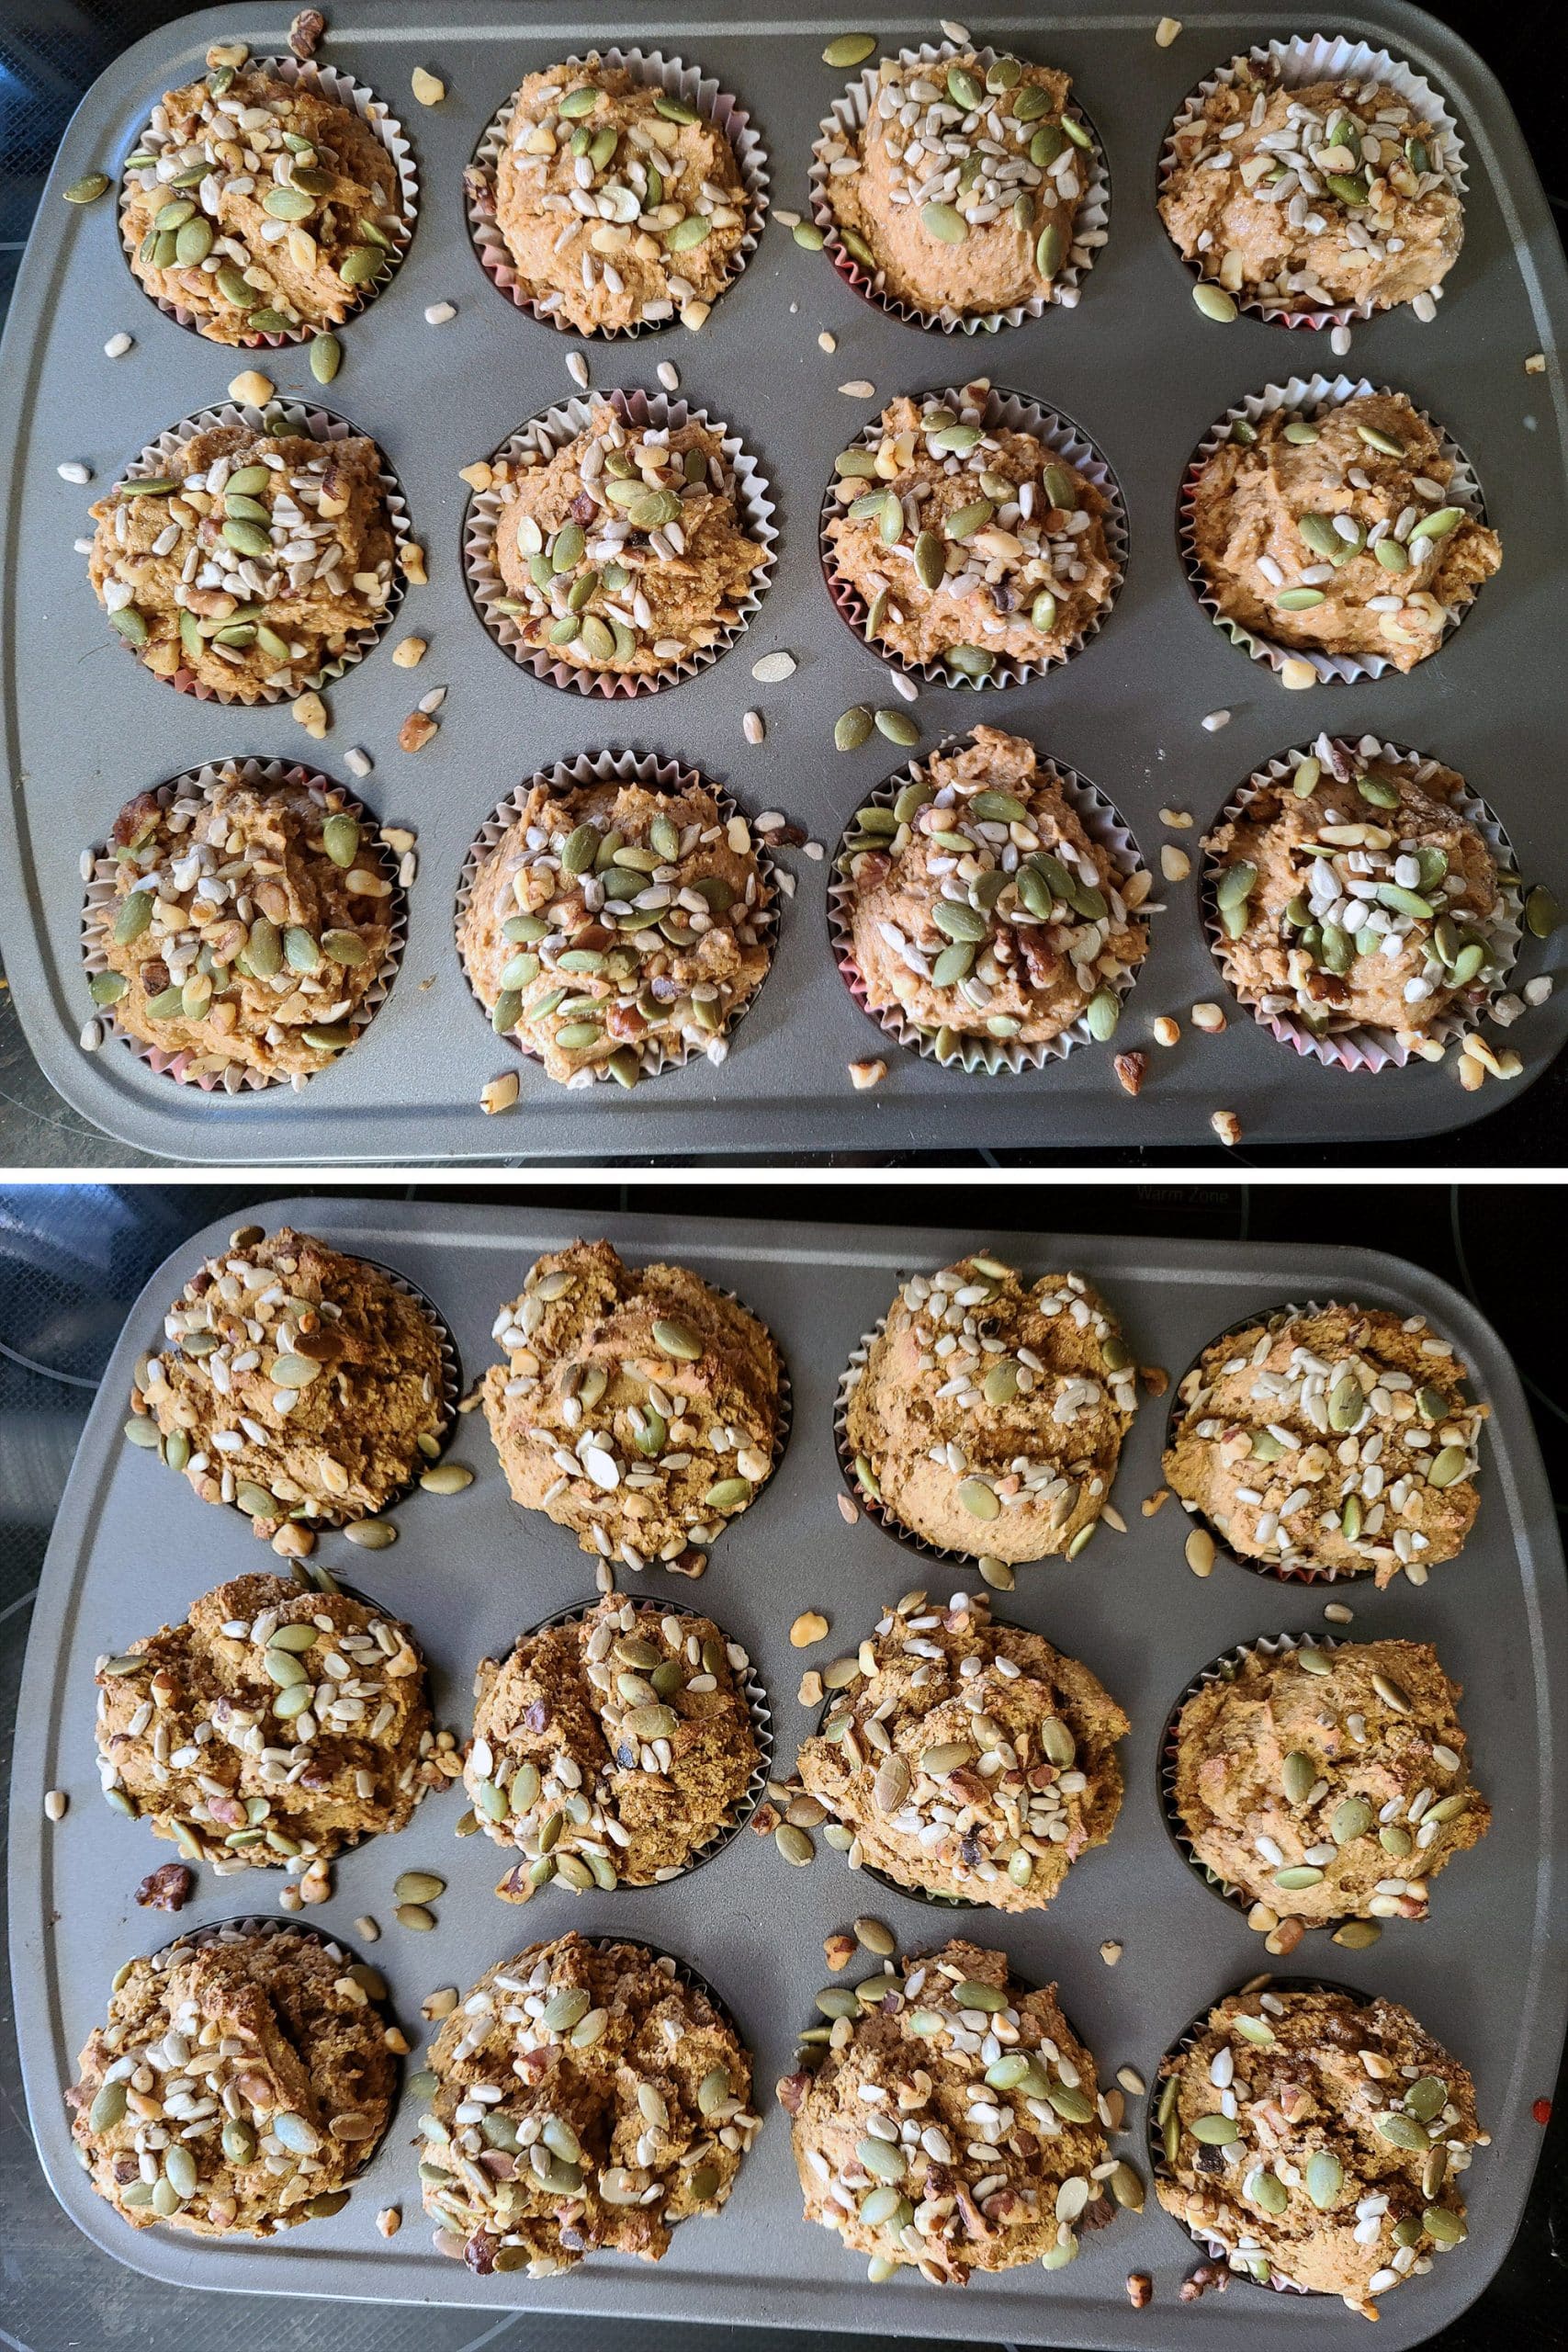 2 part image showing a pan of gluten free muffins before and after baking.